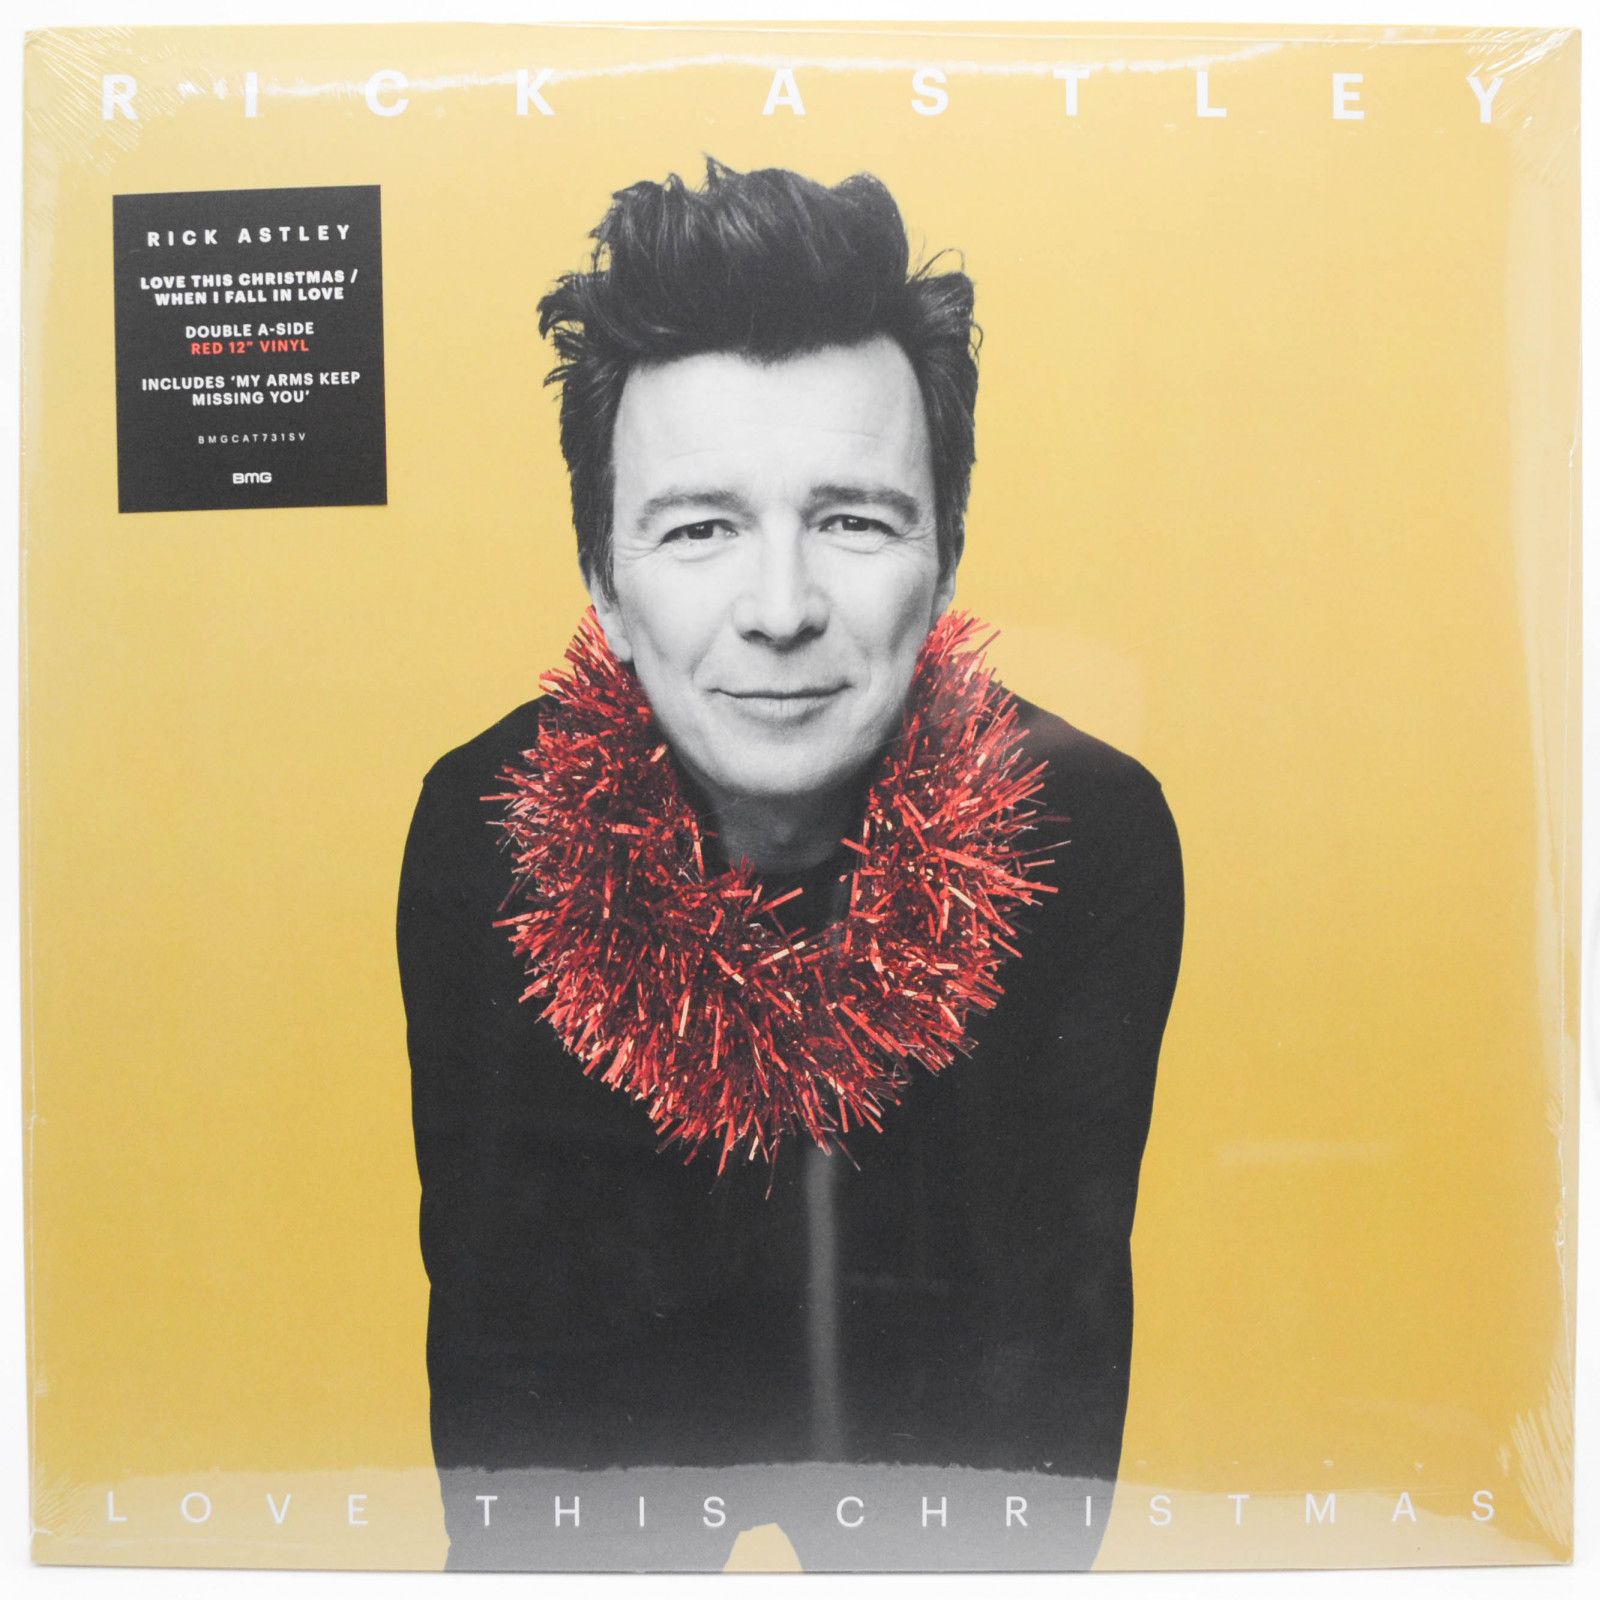 Rick Astley — Love This Christmas / When I Fall In Love, 2022